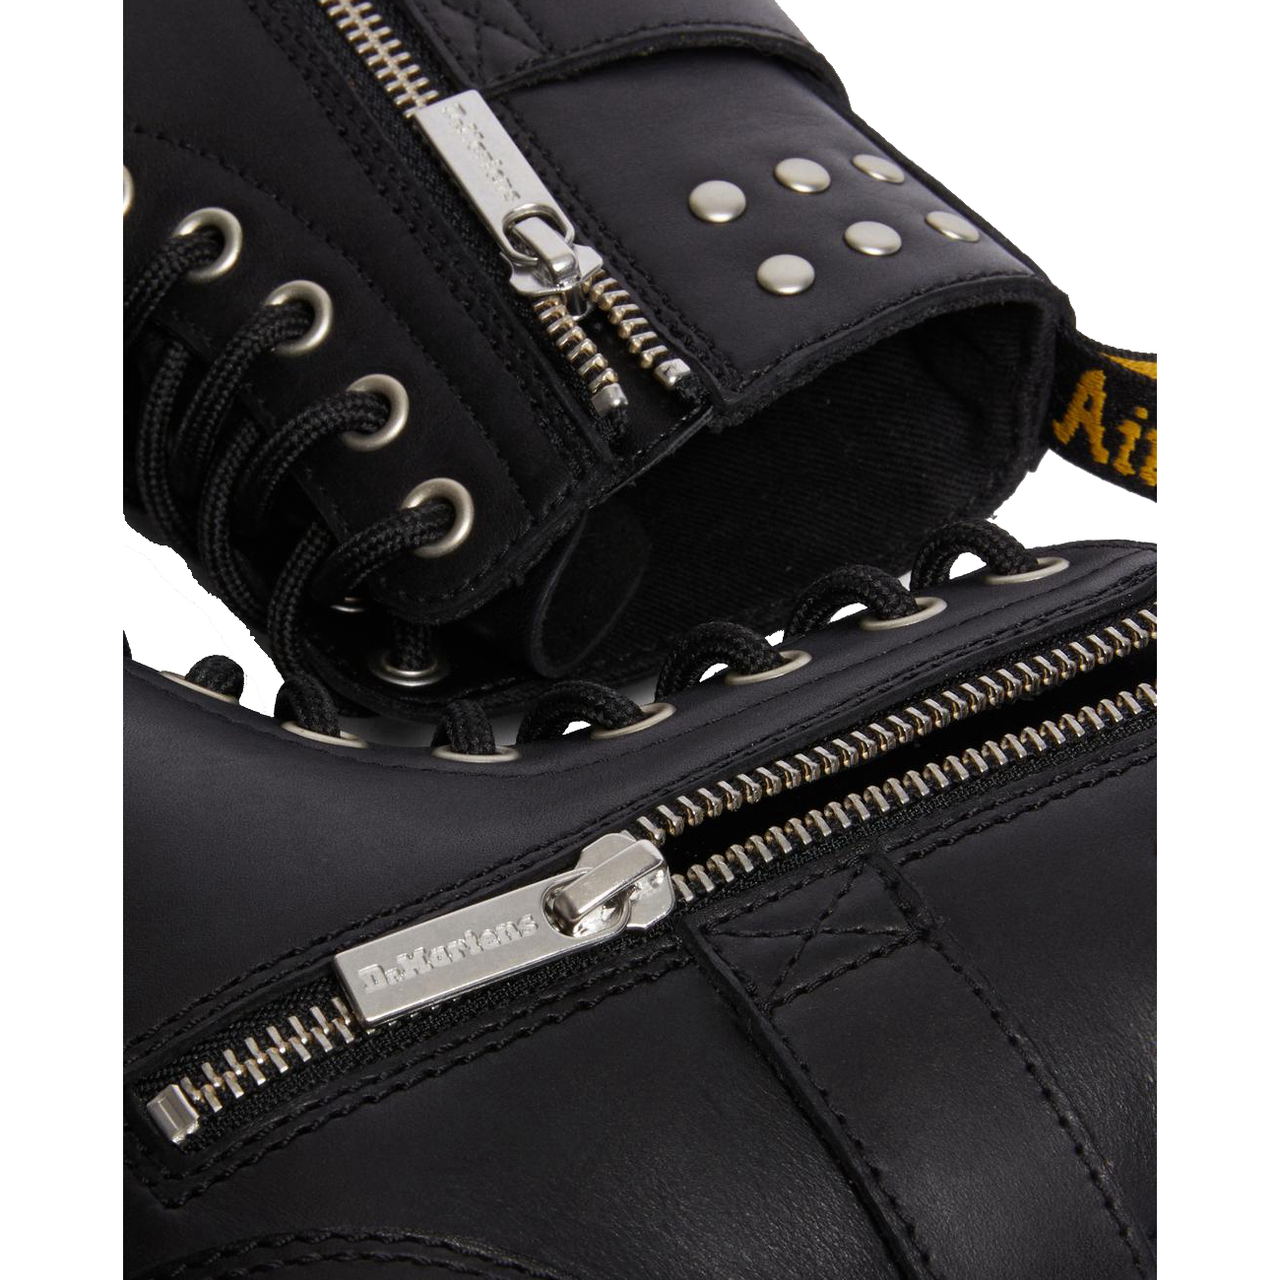 Dr. Martens Pascal Hardware Nappa Leather Boot